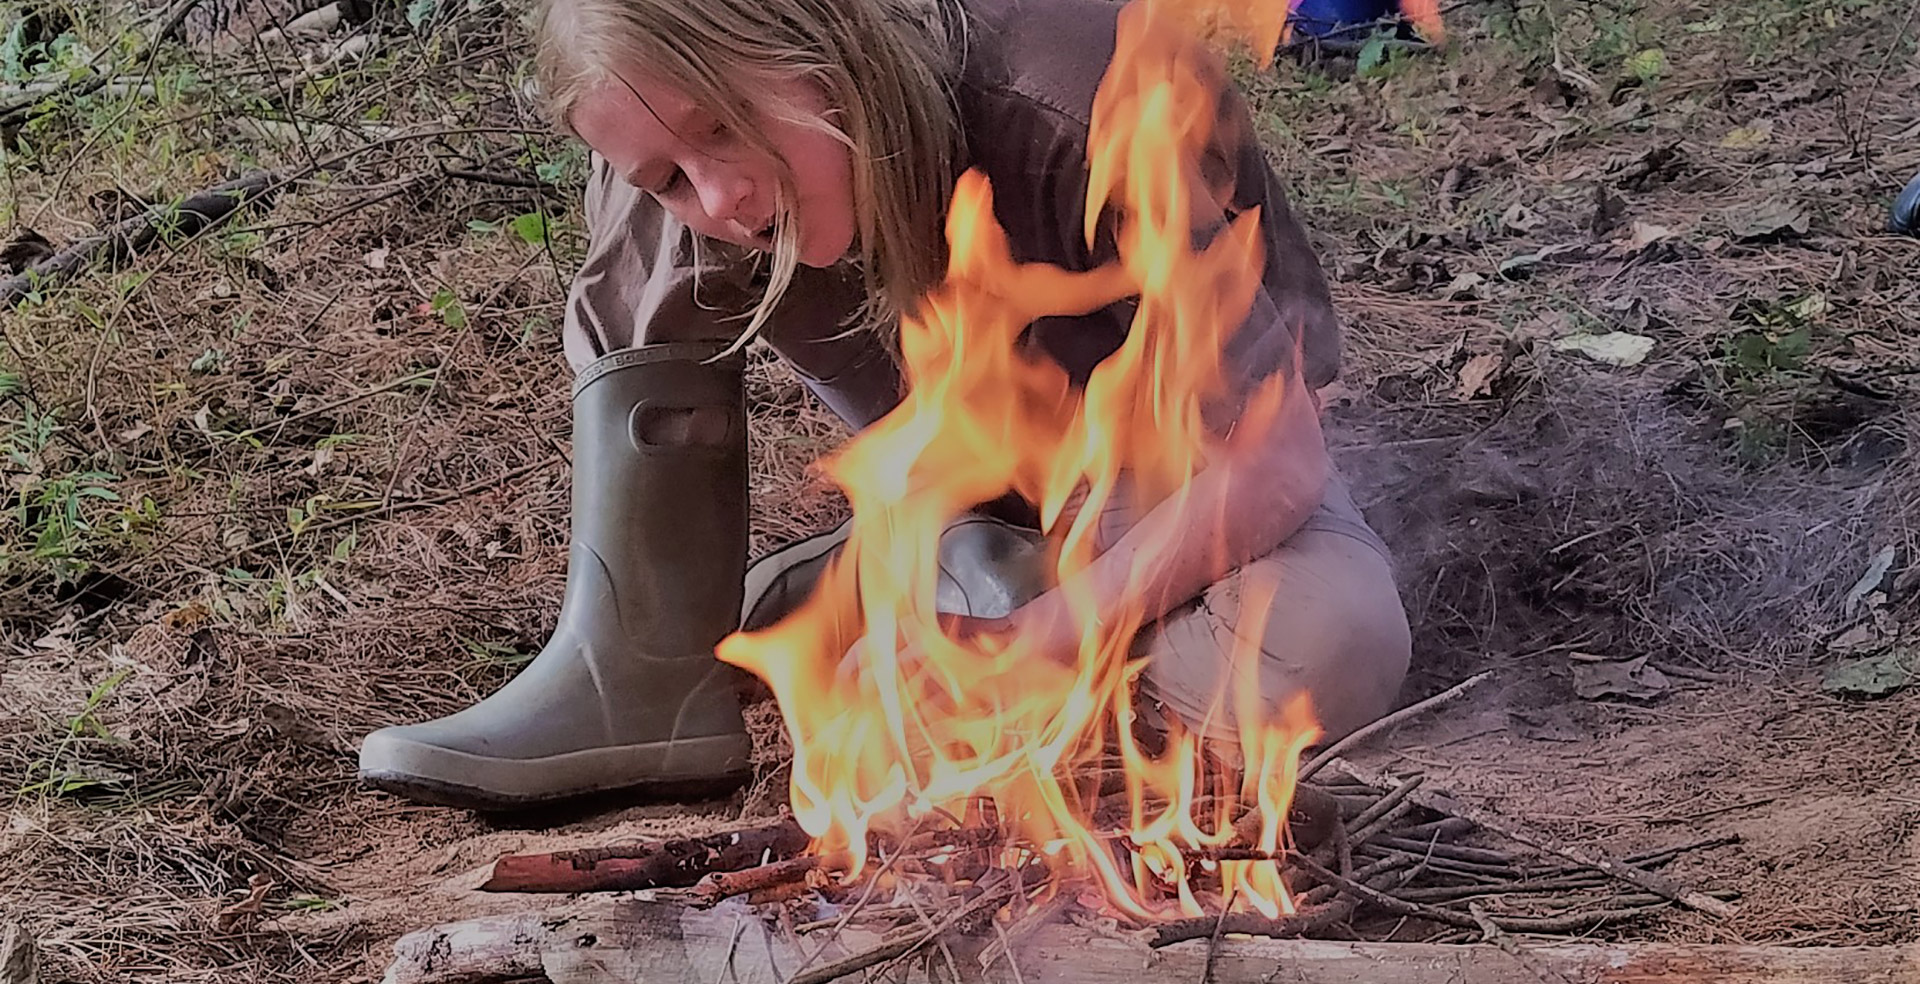 Girl learning to make fire at survival skills summer camp in Asheville